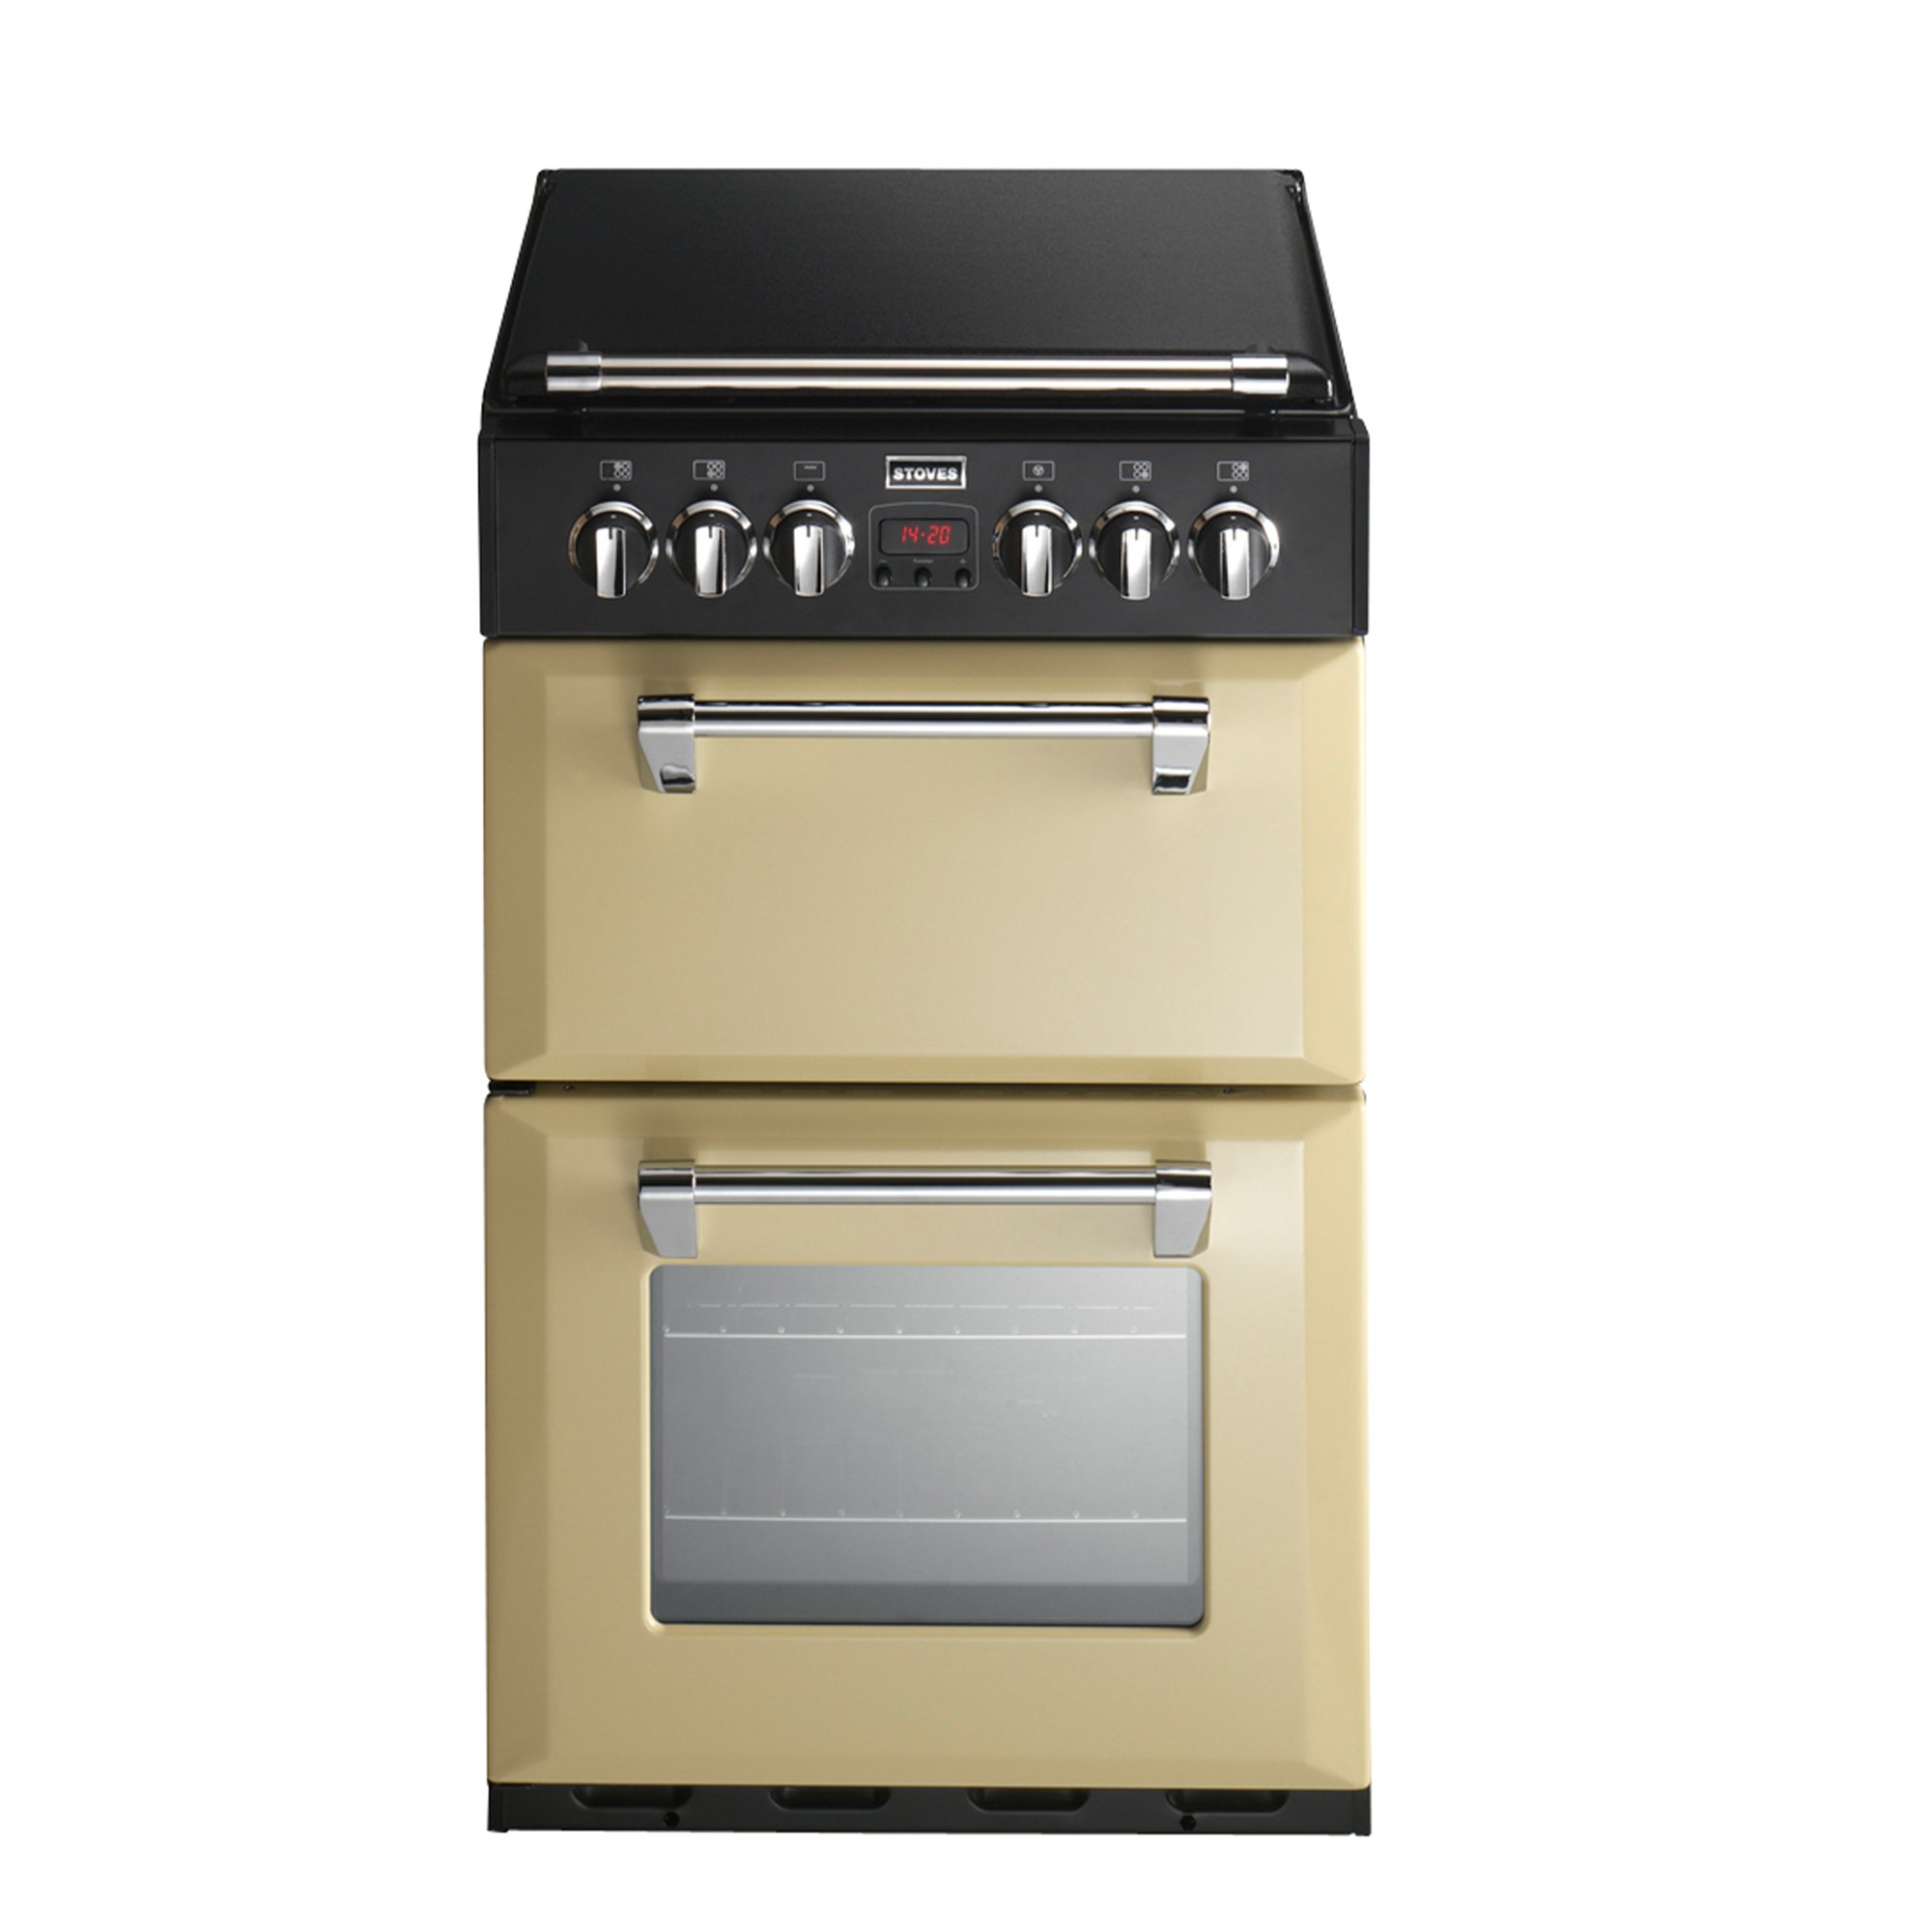 55cm electric double oven offers a programmable timer, defrost and dough proving functions and easy clean enamel. A/A energy rating.